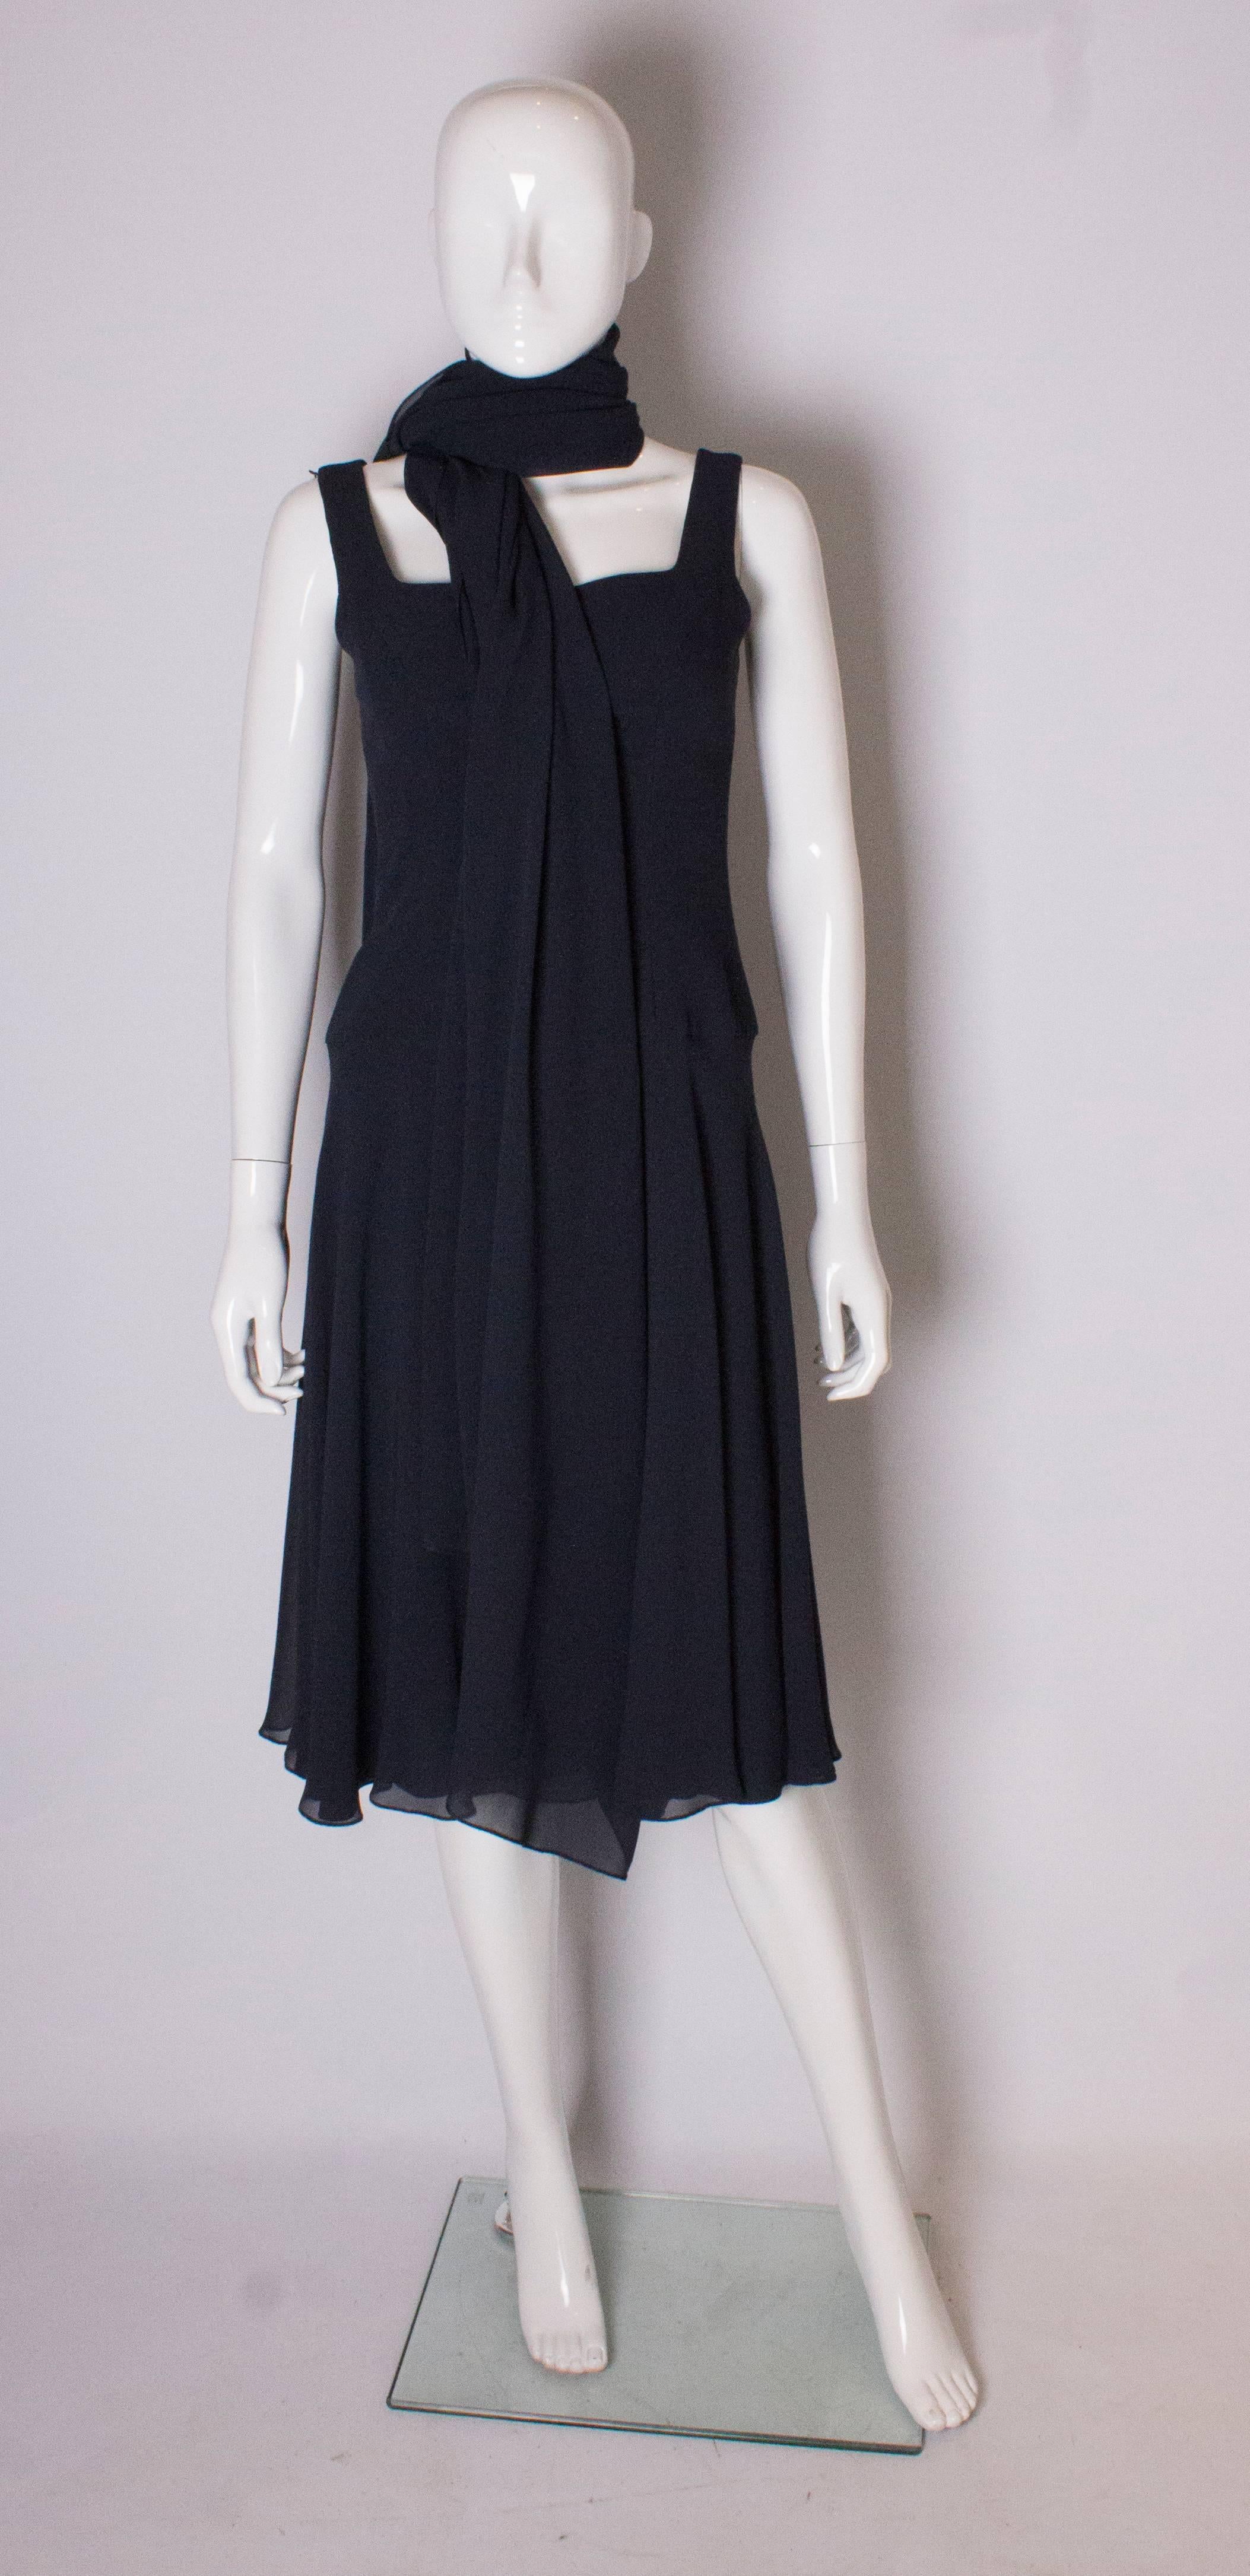 A chic vintage couture silk dress and scarf by Bruce Oldfield .The dress is  in a dark navy blue, and is fitted with a square neckline, sleaveless and lined in silk. It has a flared skirt, and central back zip. The matching silk chiffon scarf